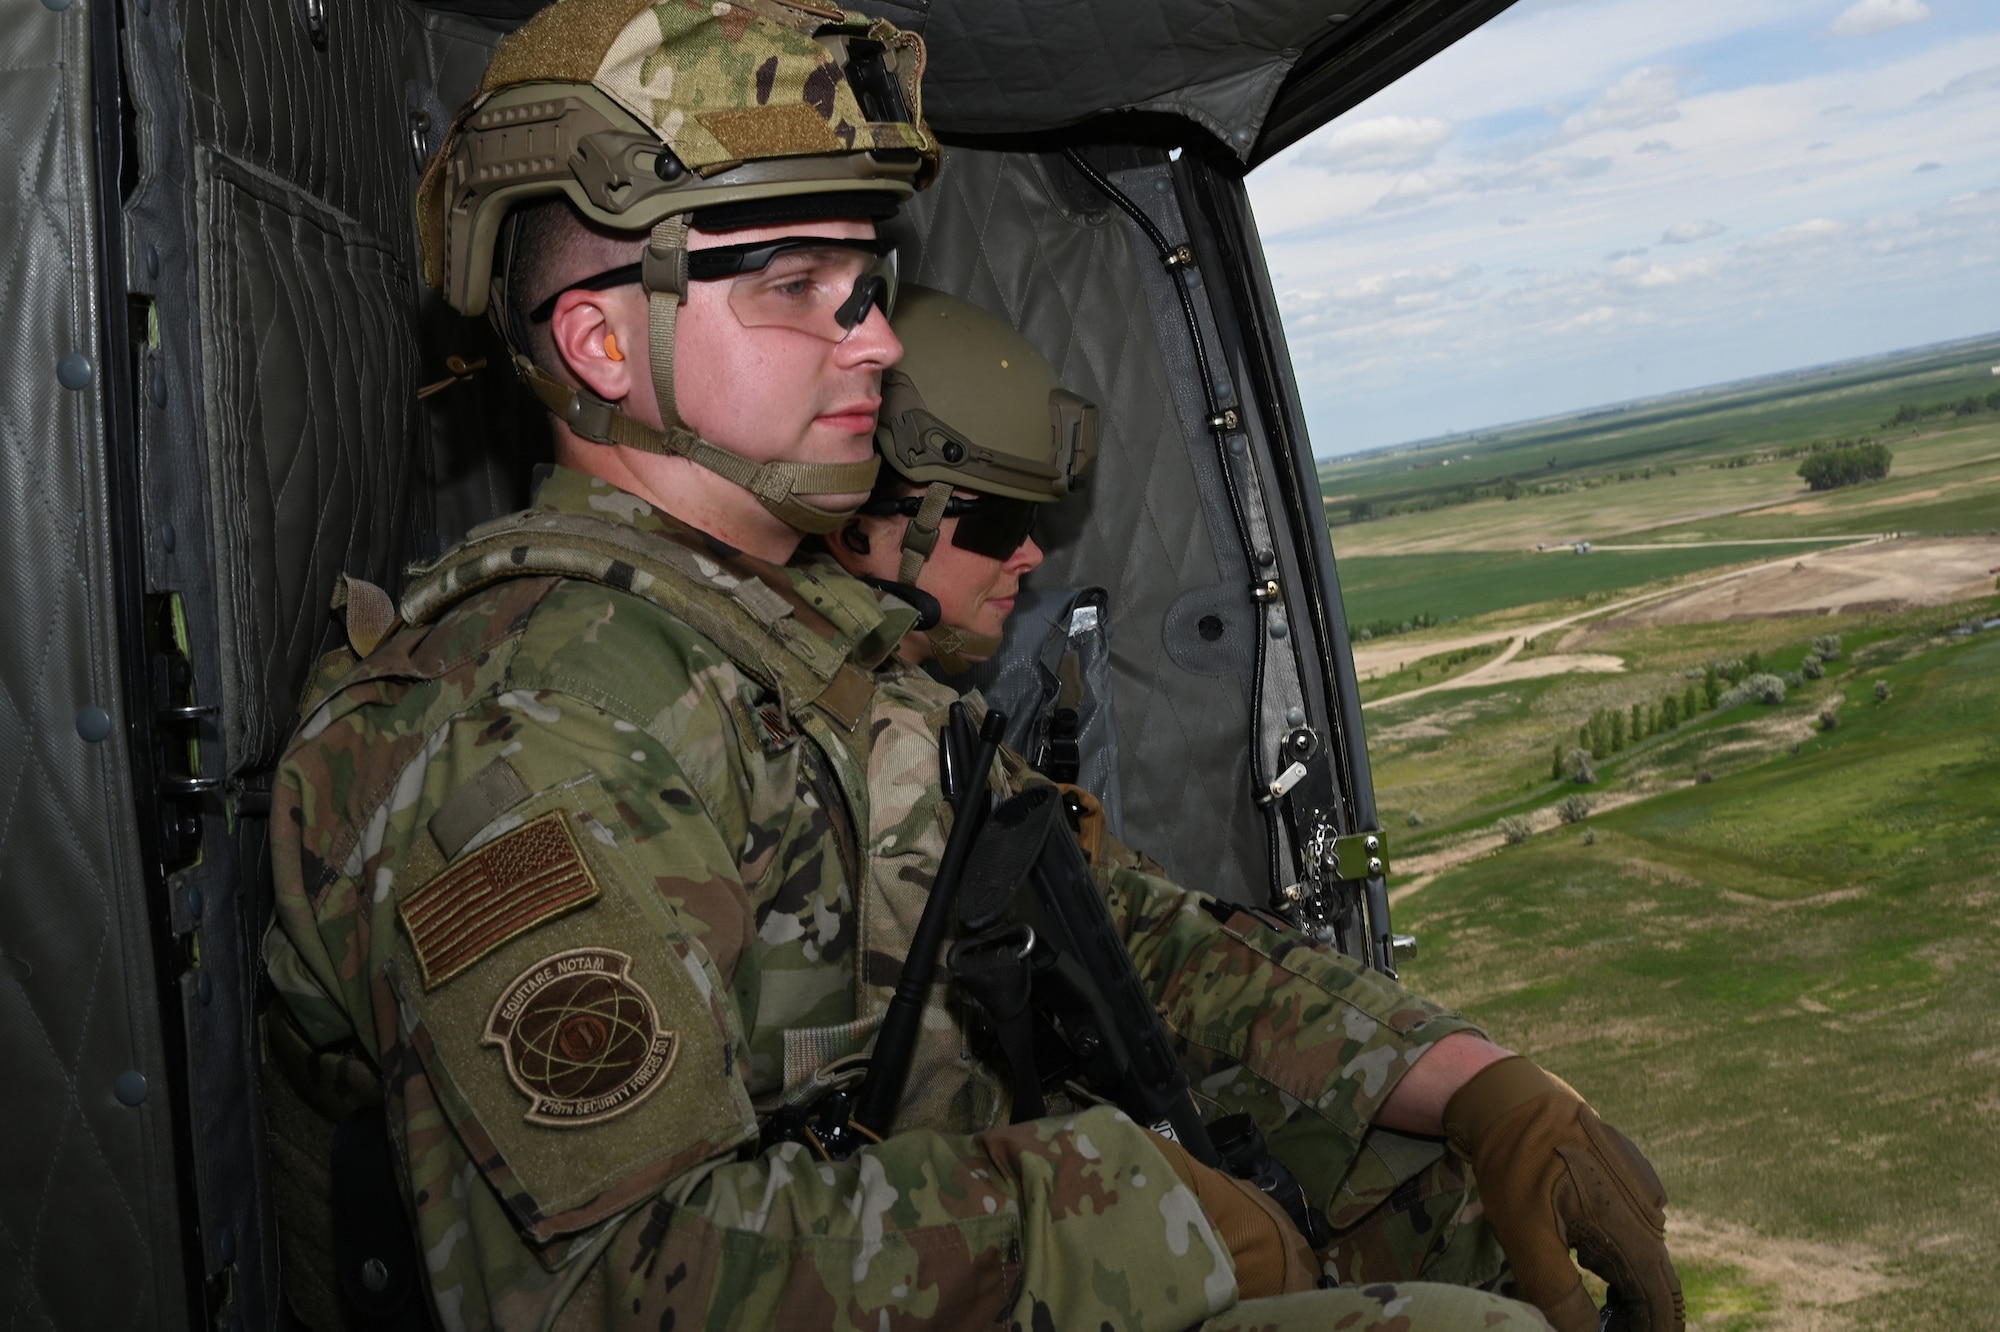 Two North Dakota Air National Guard 219 Security Forces Squadron members wearing military uniforms sit in a UH-1N Huey helicopter, looking out an open door, as they fly over a rural area near the Minot Air Force Base, N.D., June 24, 2021.